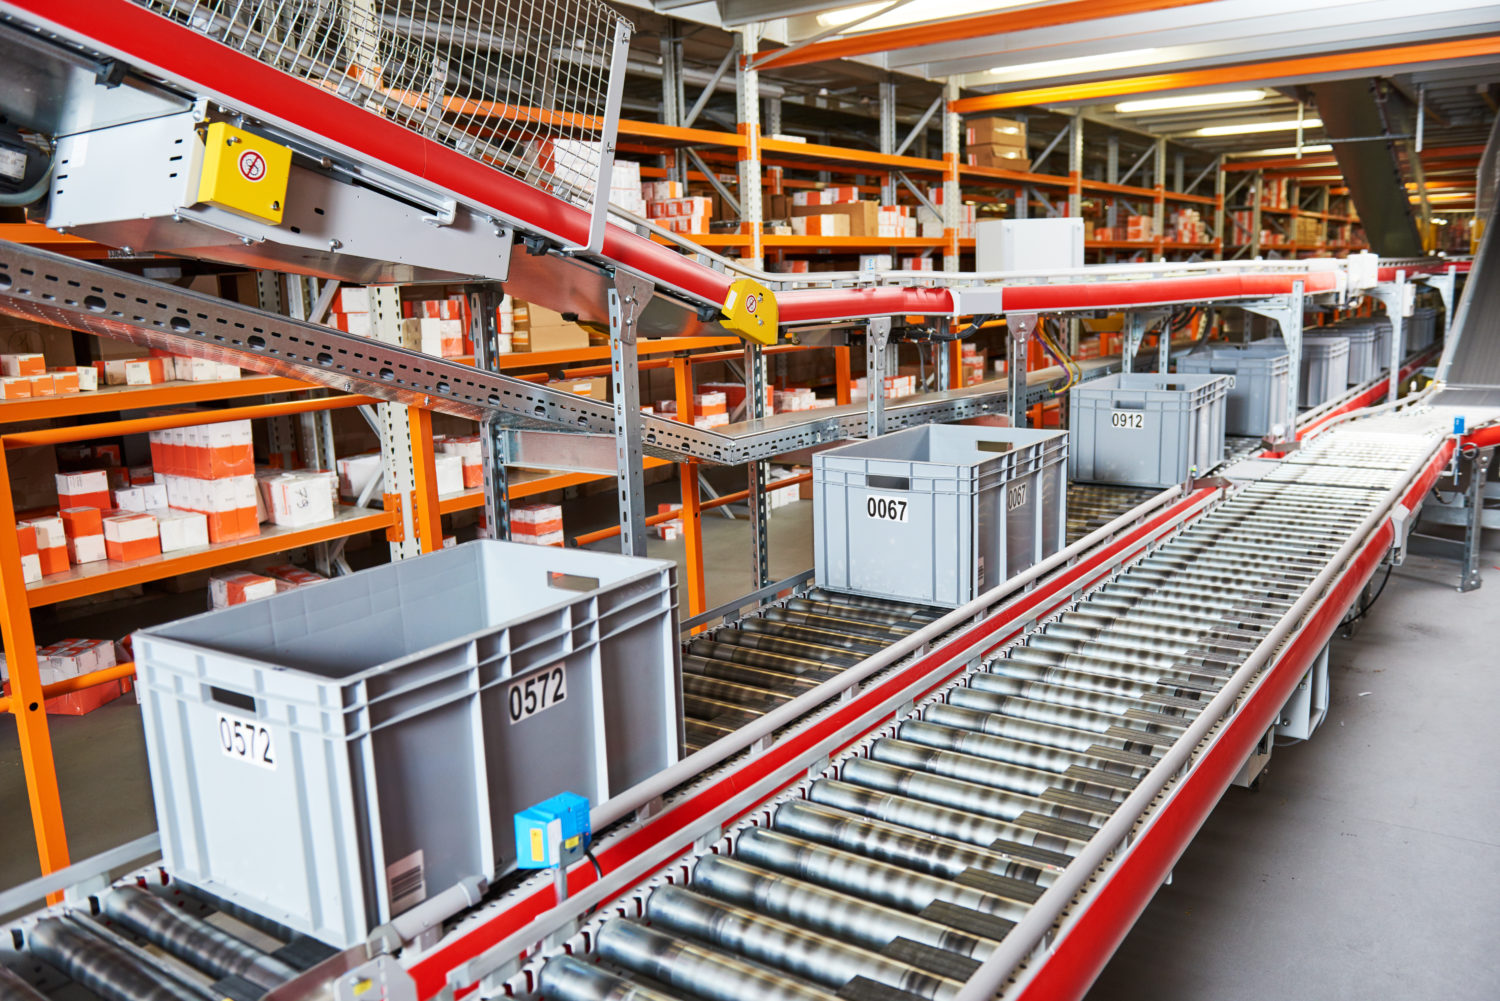 How Much Does Warehouse Automation Cost?